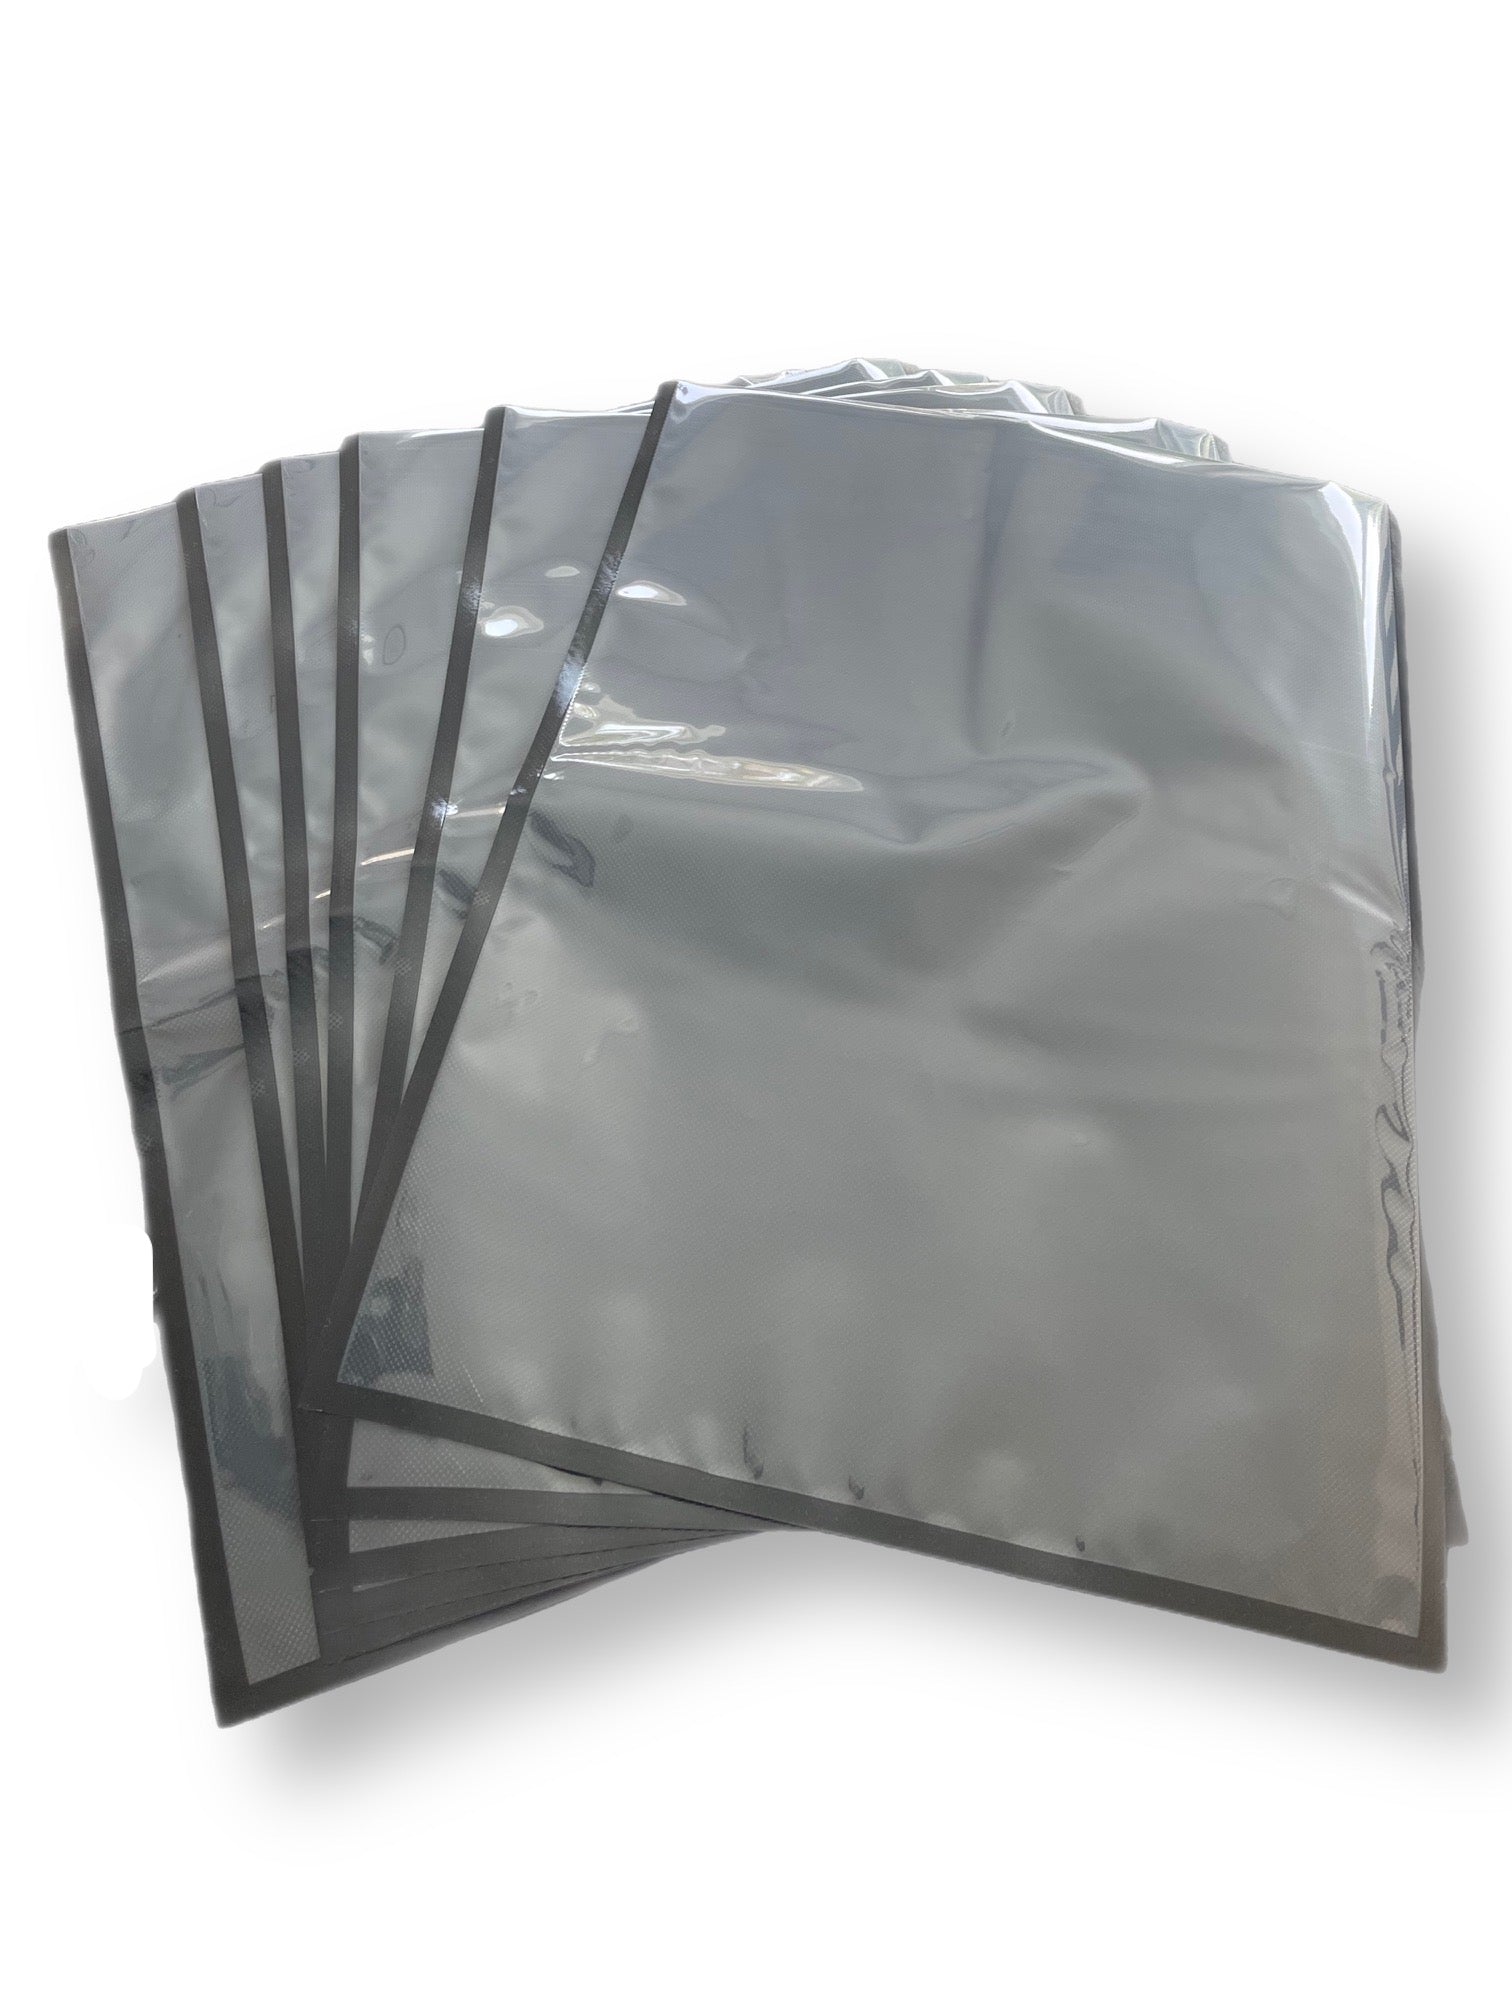 Close-up of the 454 Vacuum Bags, showcasing the clear and black sides of the 5 mil thick bags. Designed with a strong seal and puncture resistance for optimal cannabis storage and protection.